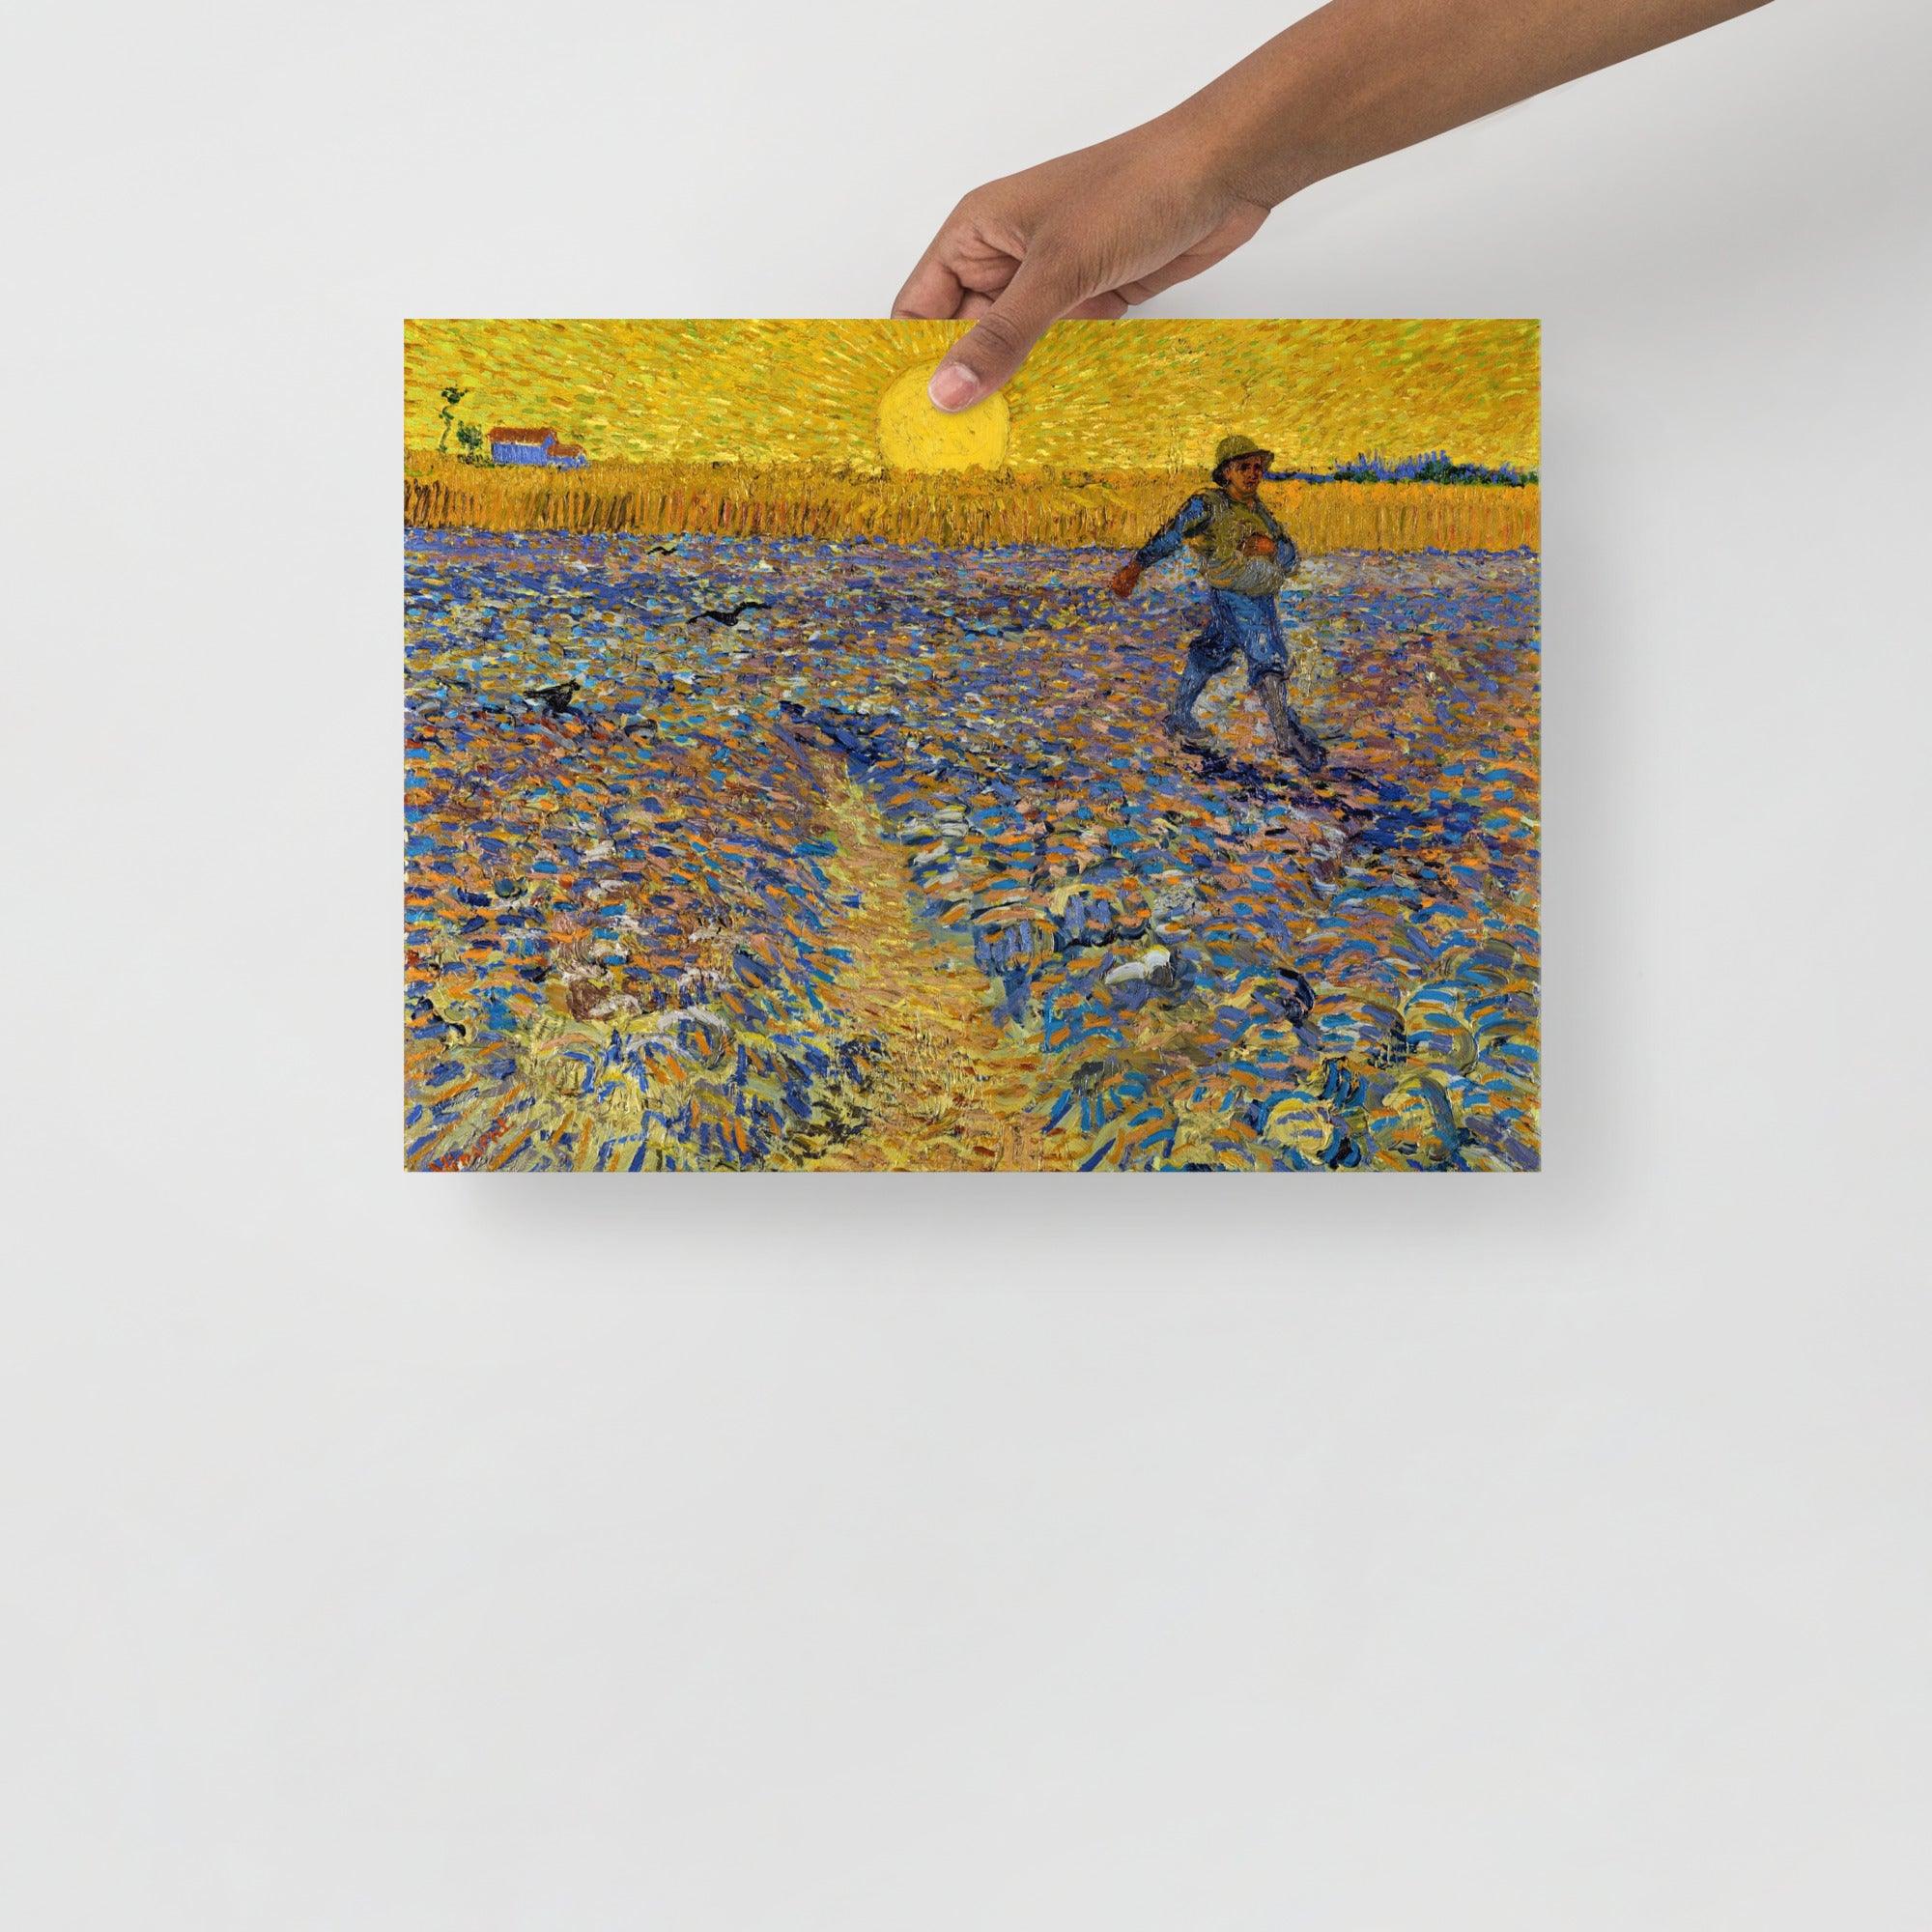 The Sower by Vincent Van Gogh poster on a plain backdrop in size12x16”.